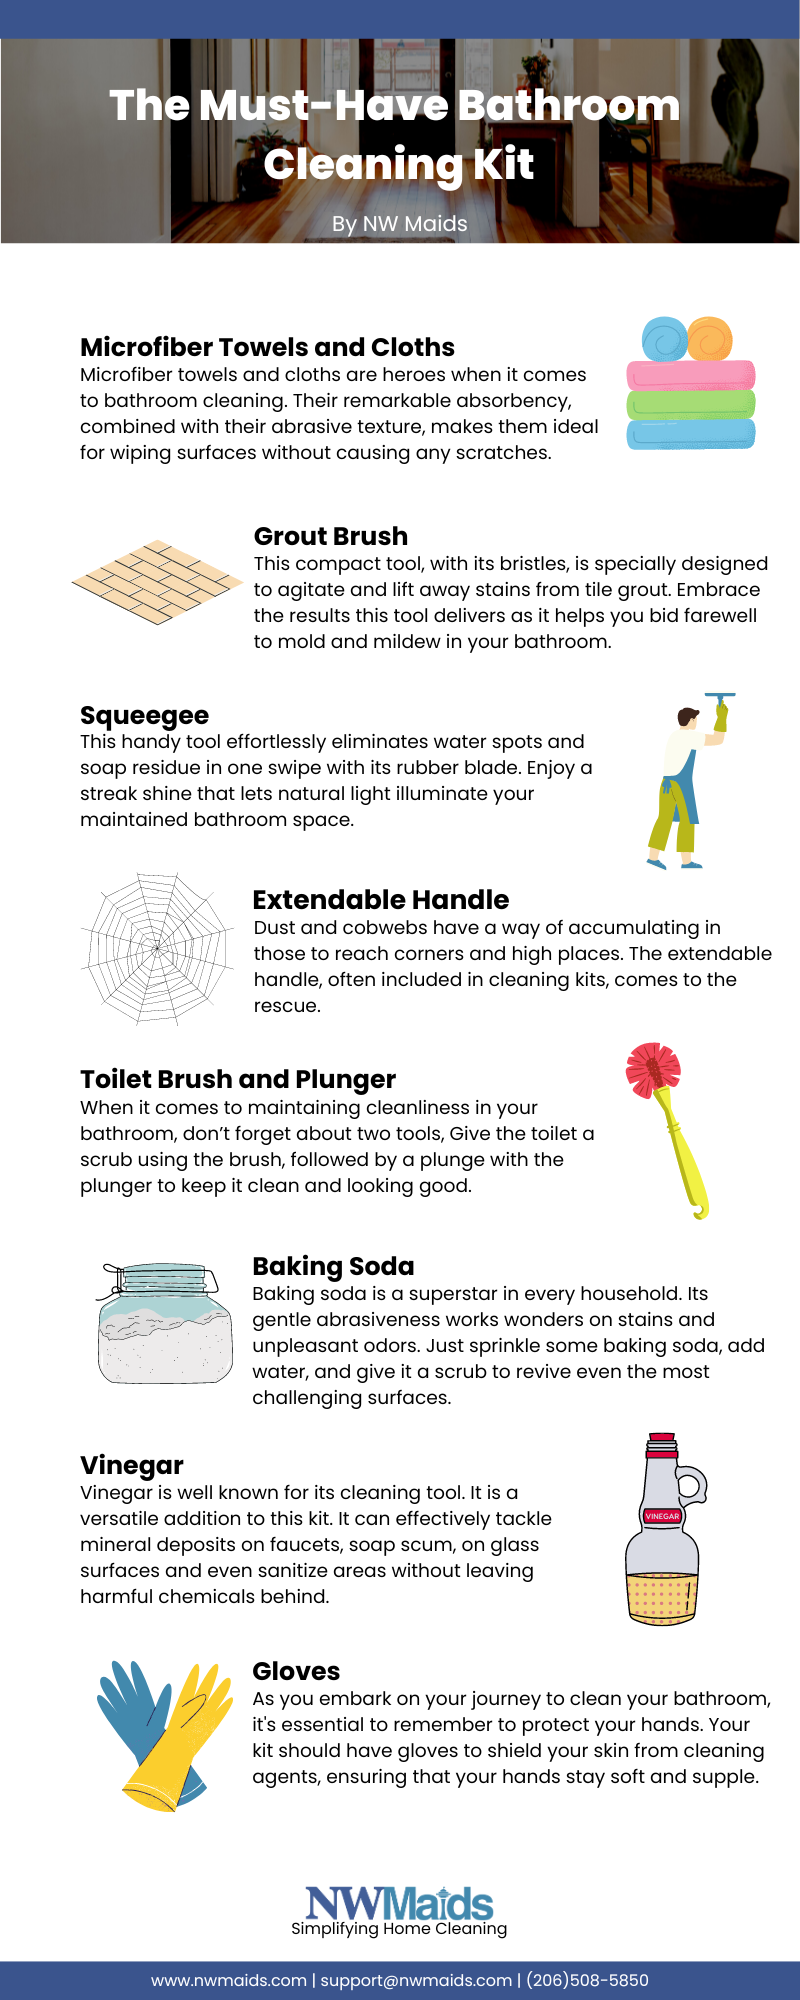 The Must-Have Bathroom Cleaning Kit